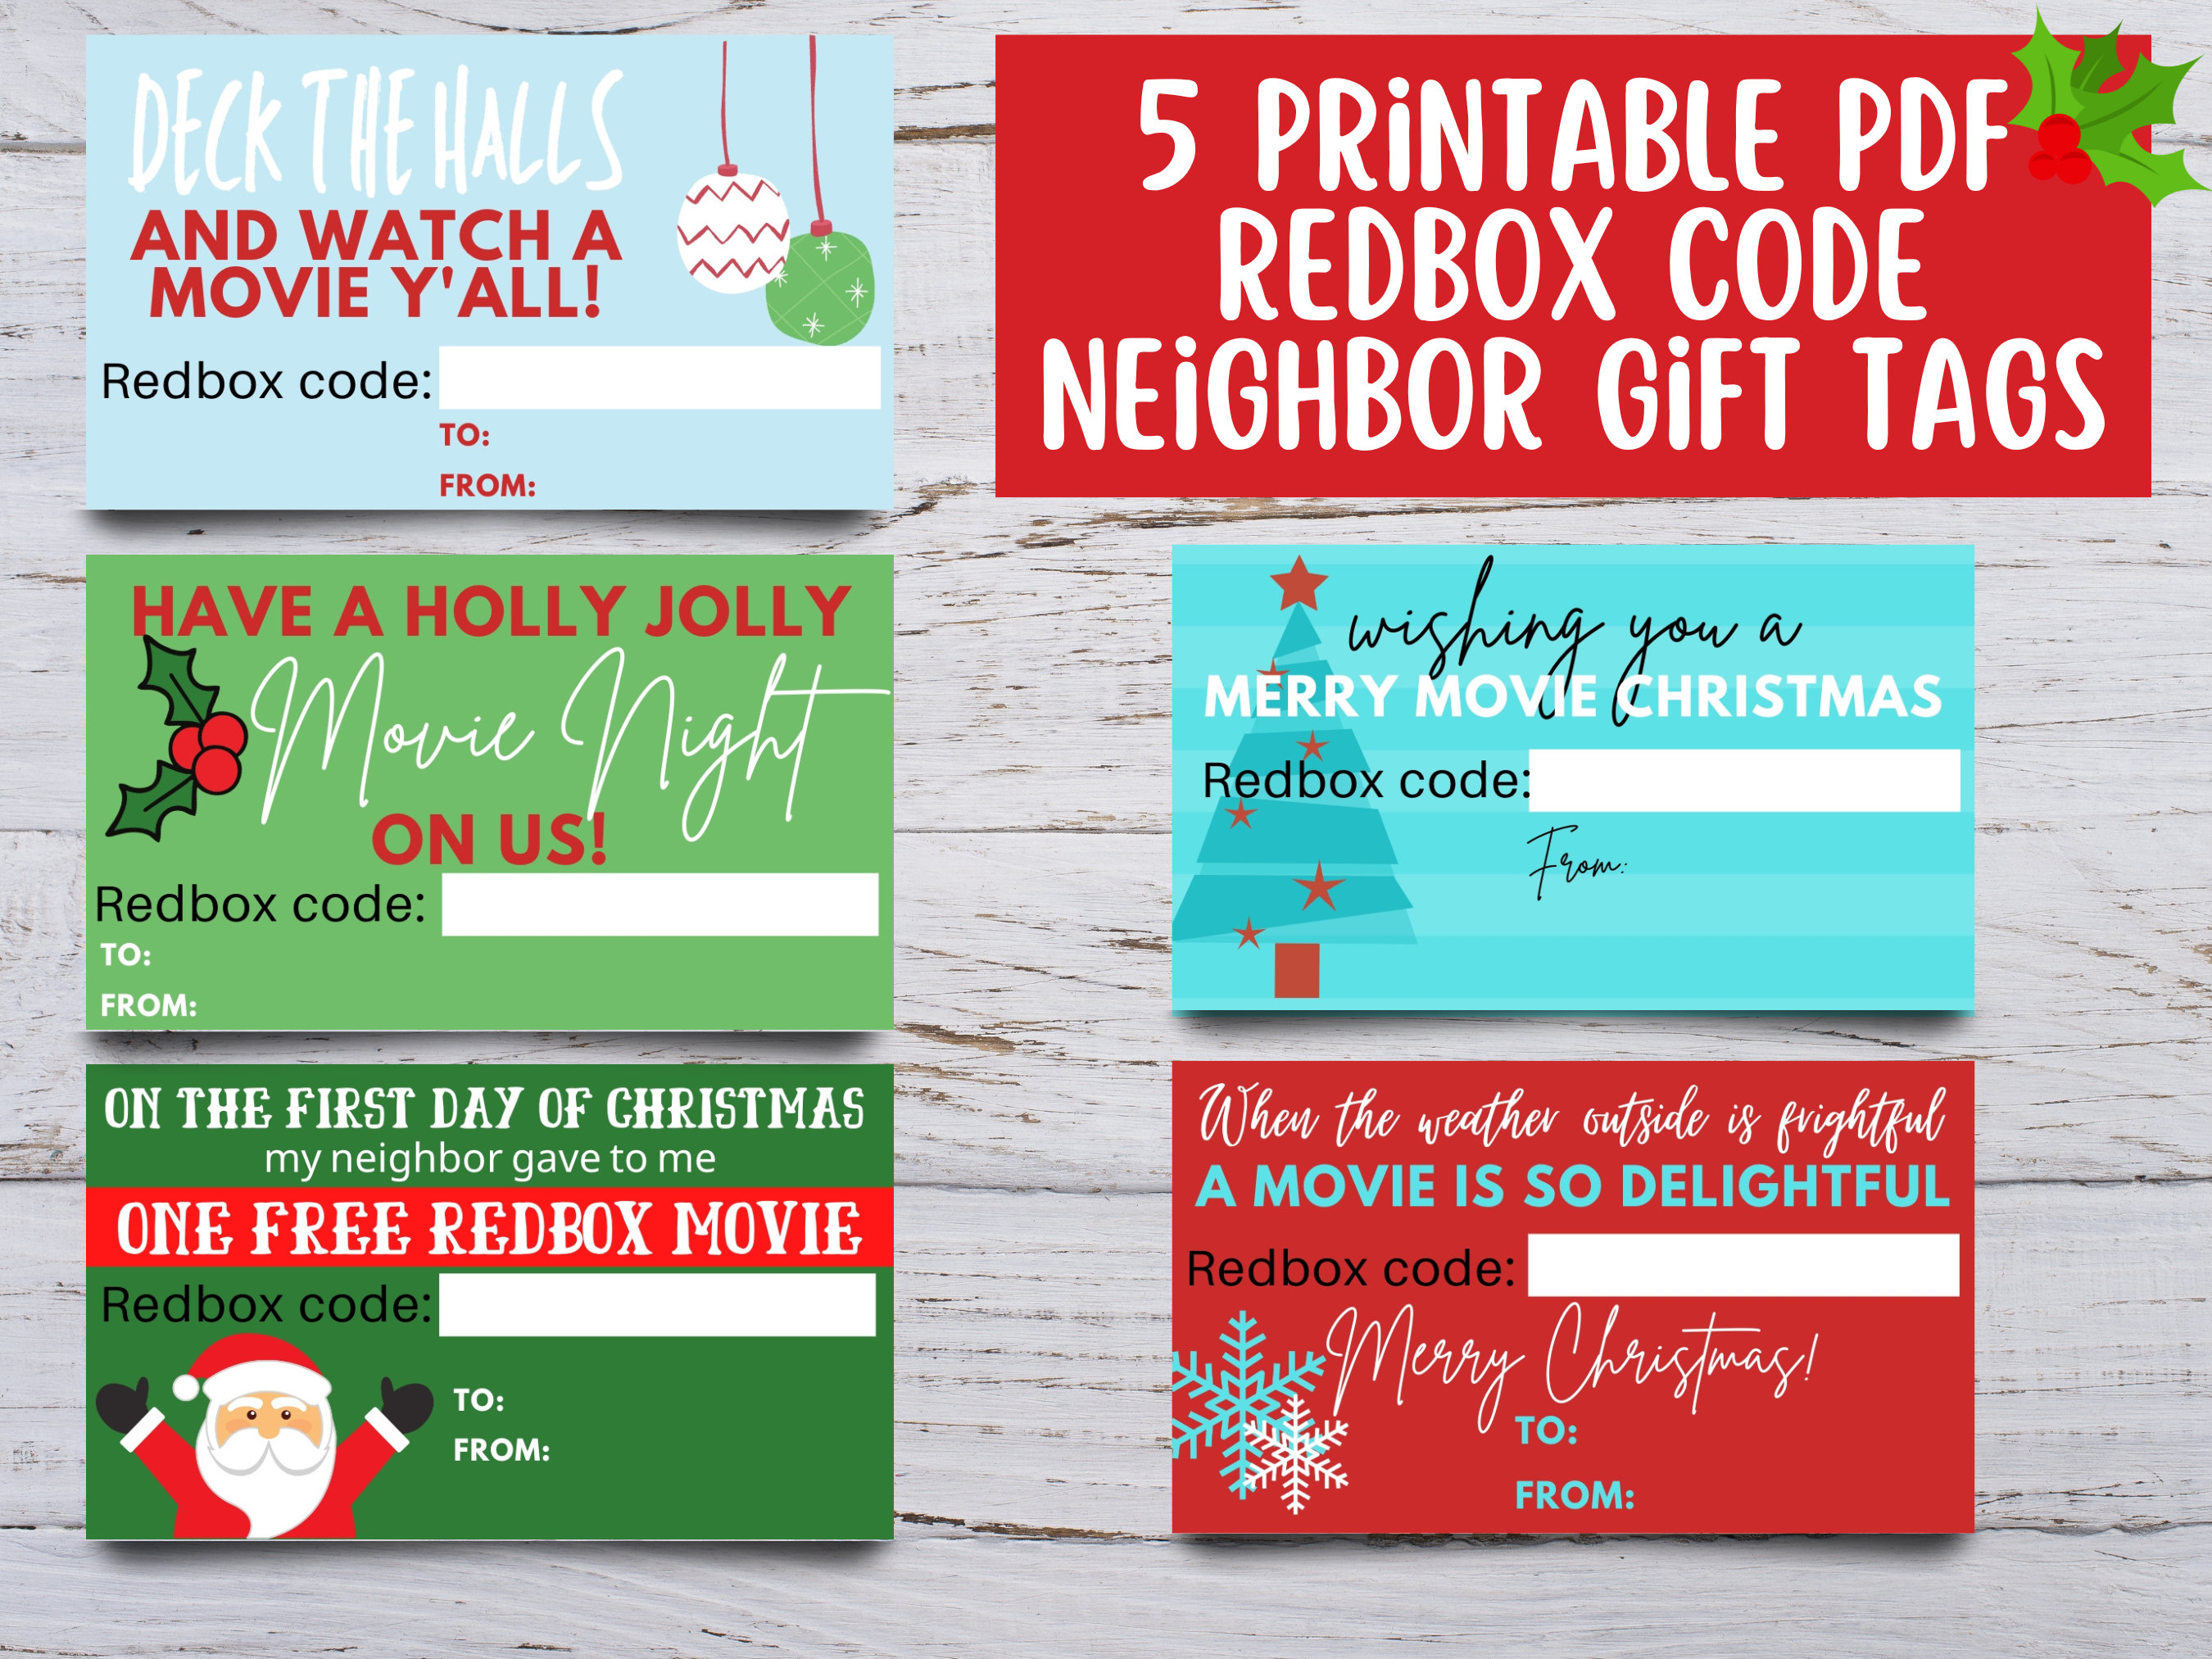 Christmas Gift Tag / Tape / Neighbor Gift / Green Red / DIGITAL Printable  Card / Co-worker Friend School / Non Food Holiday Present / Jpeg 